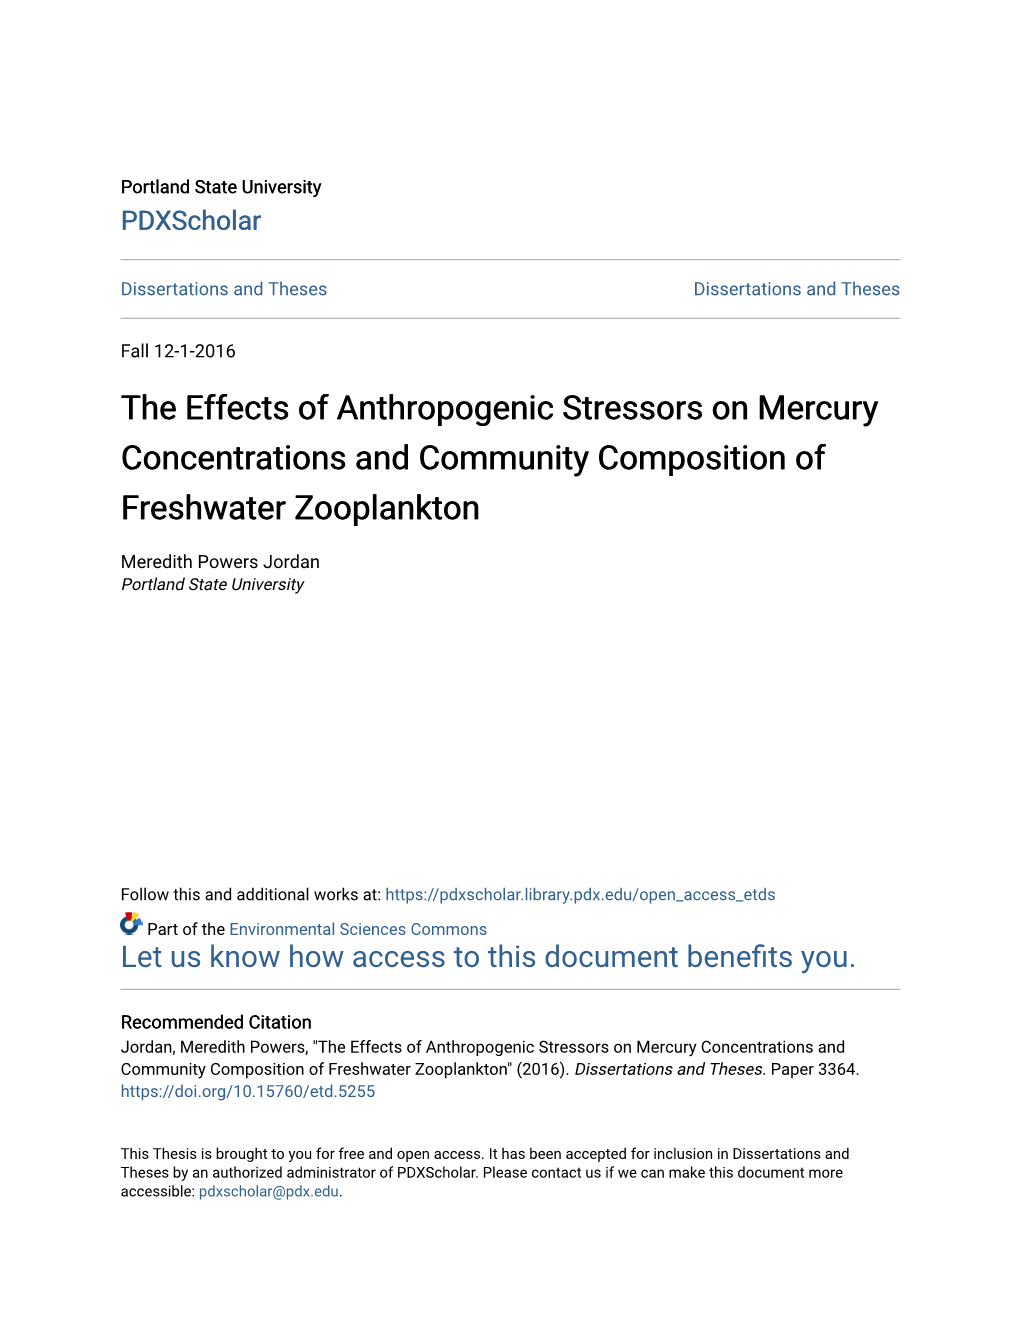 The Effects of Anthropogenic Stressors on Mercury Concentrations and Community Composition of Freshwater Zooplankton